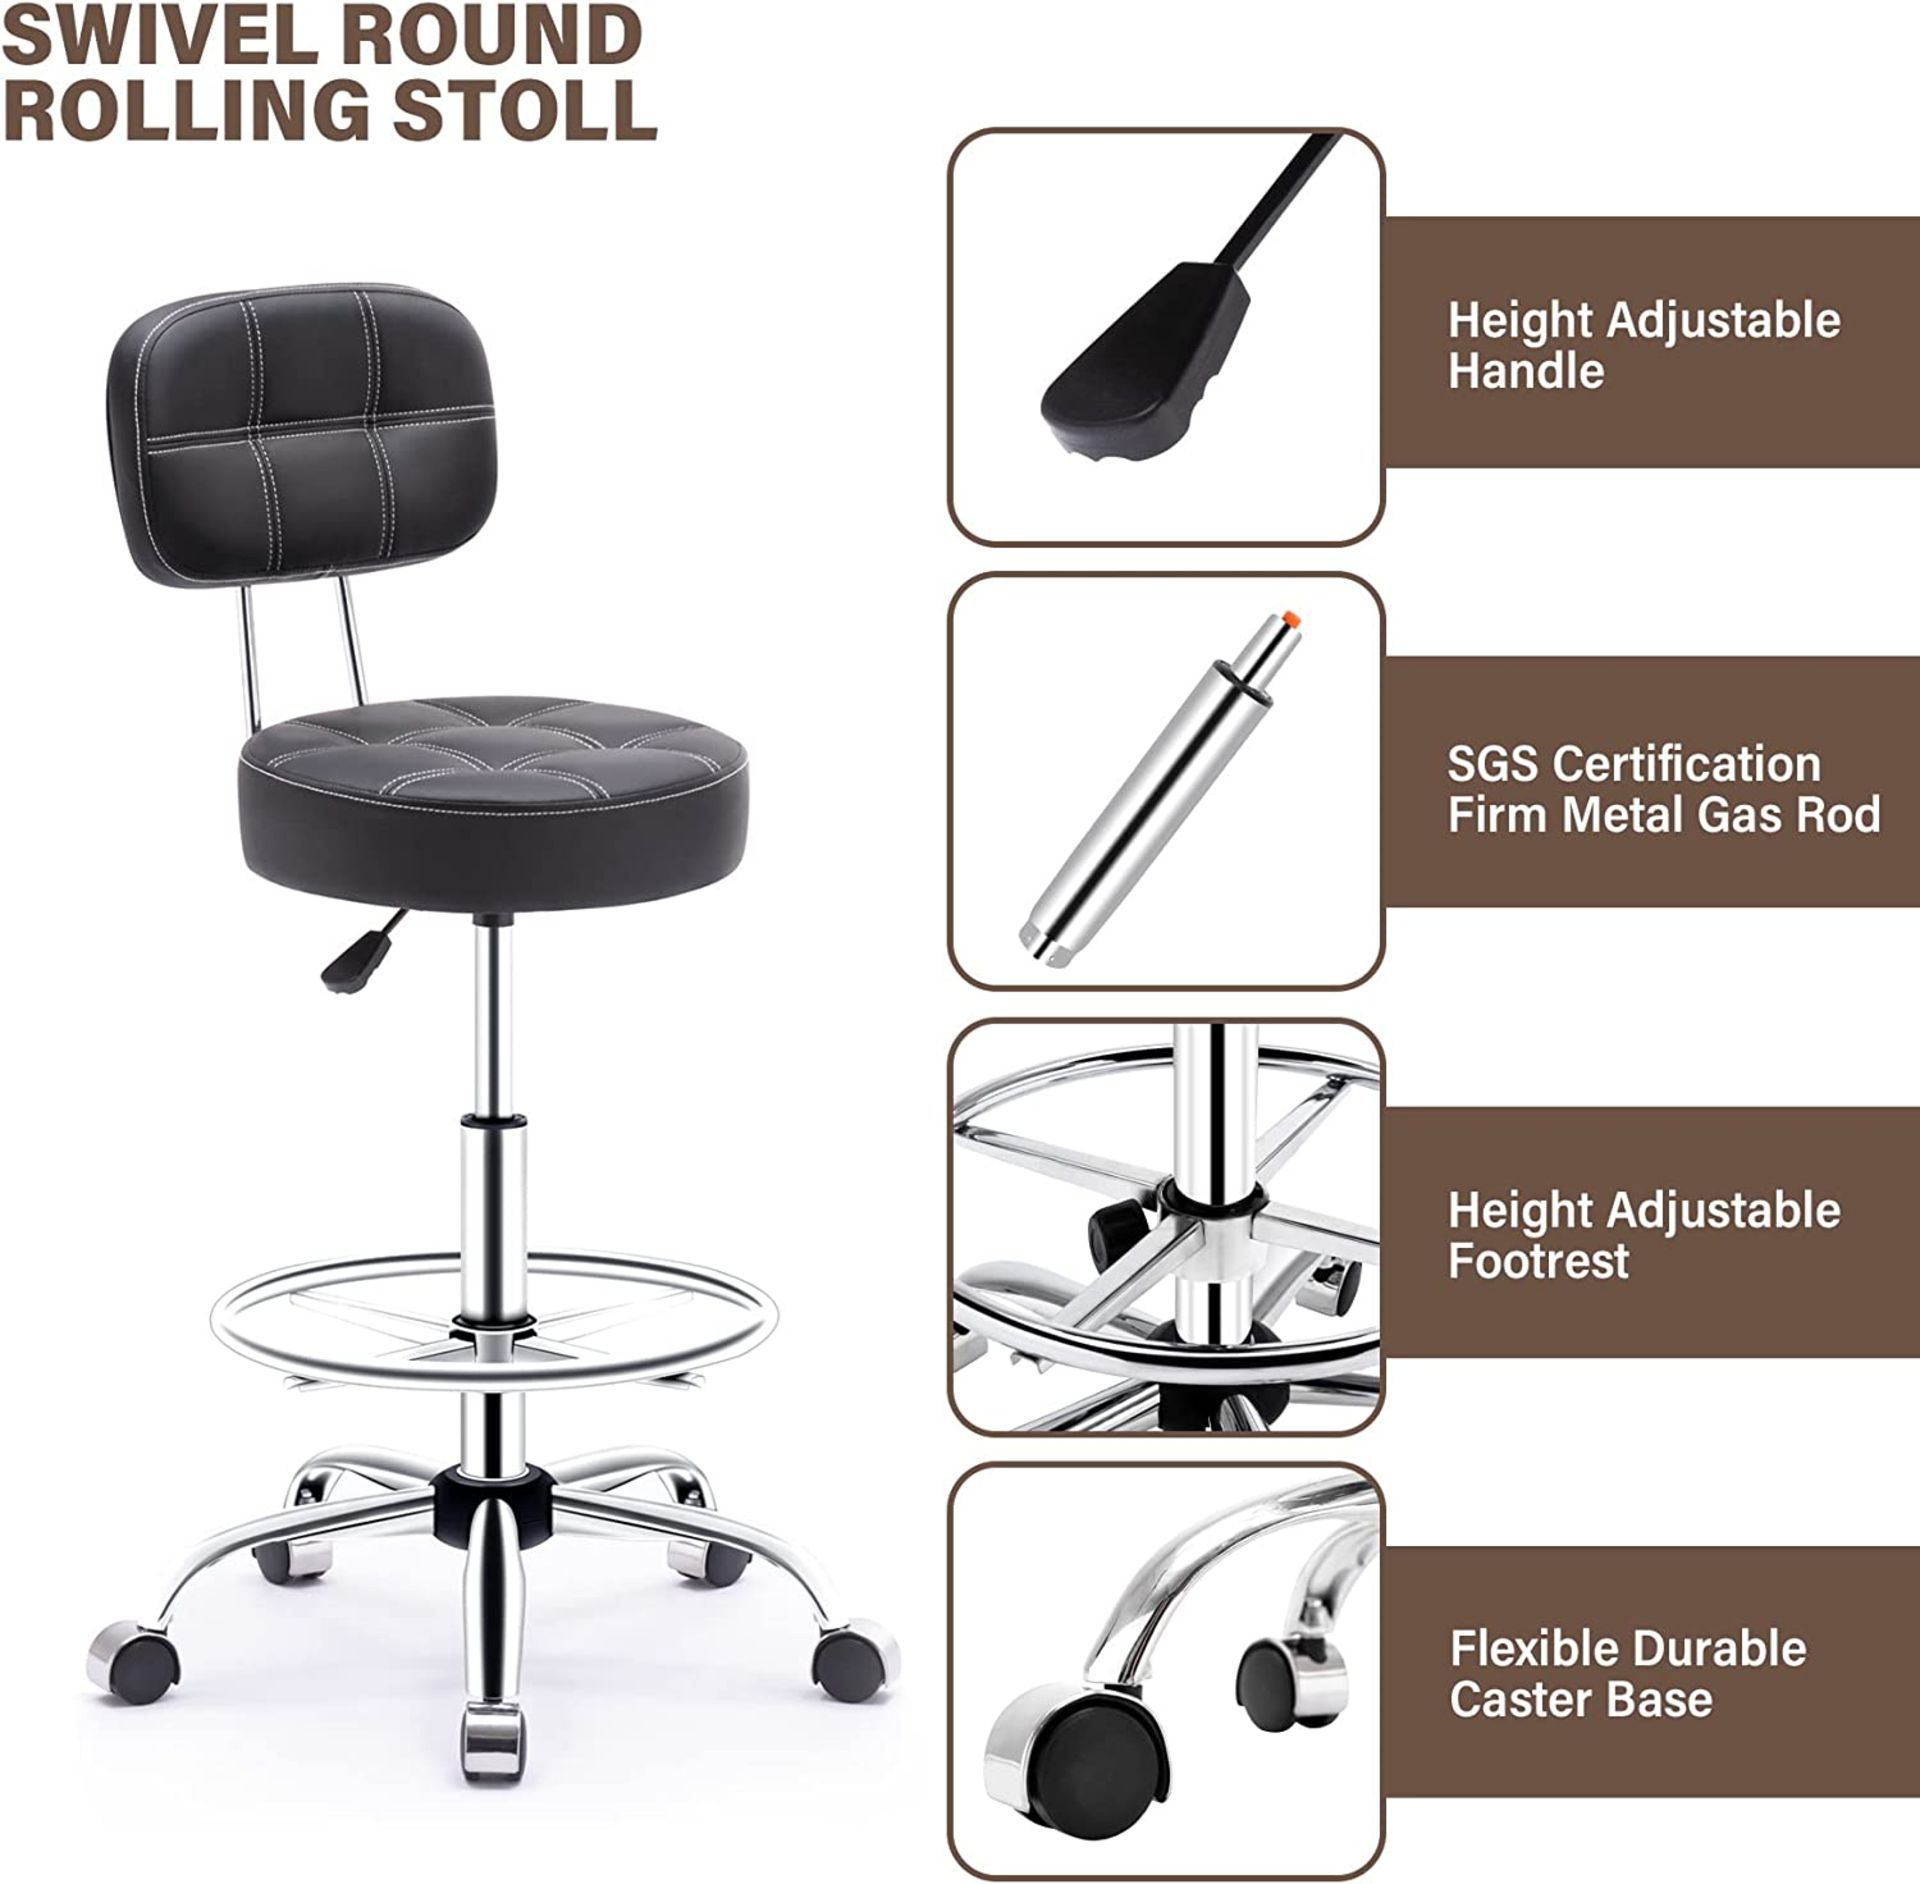 NEW Rolling stool with High Backrest and Adjustable Footrest, Leather Massage Stool Ergonomic - Image 4 of 5